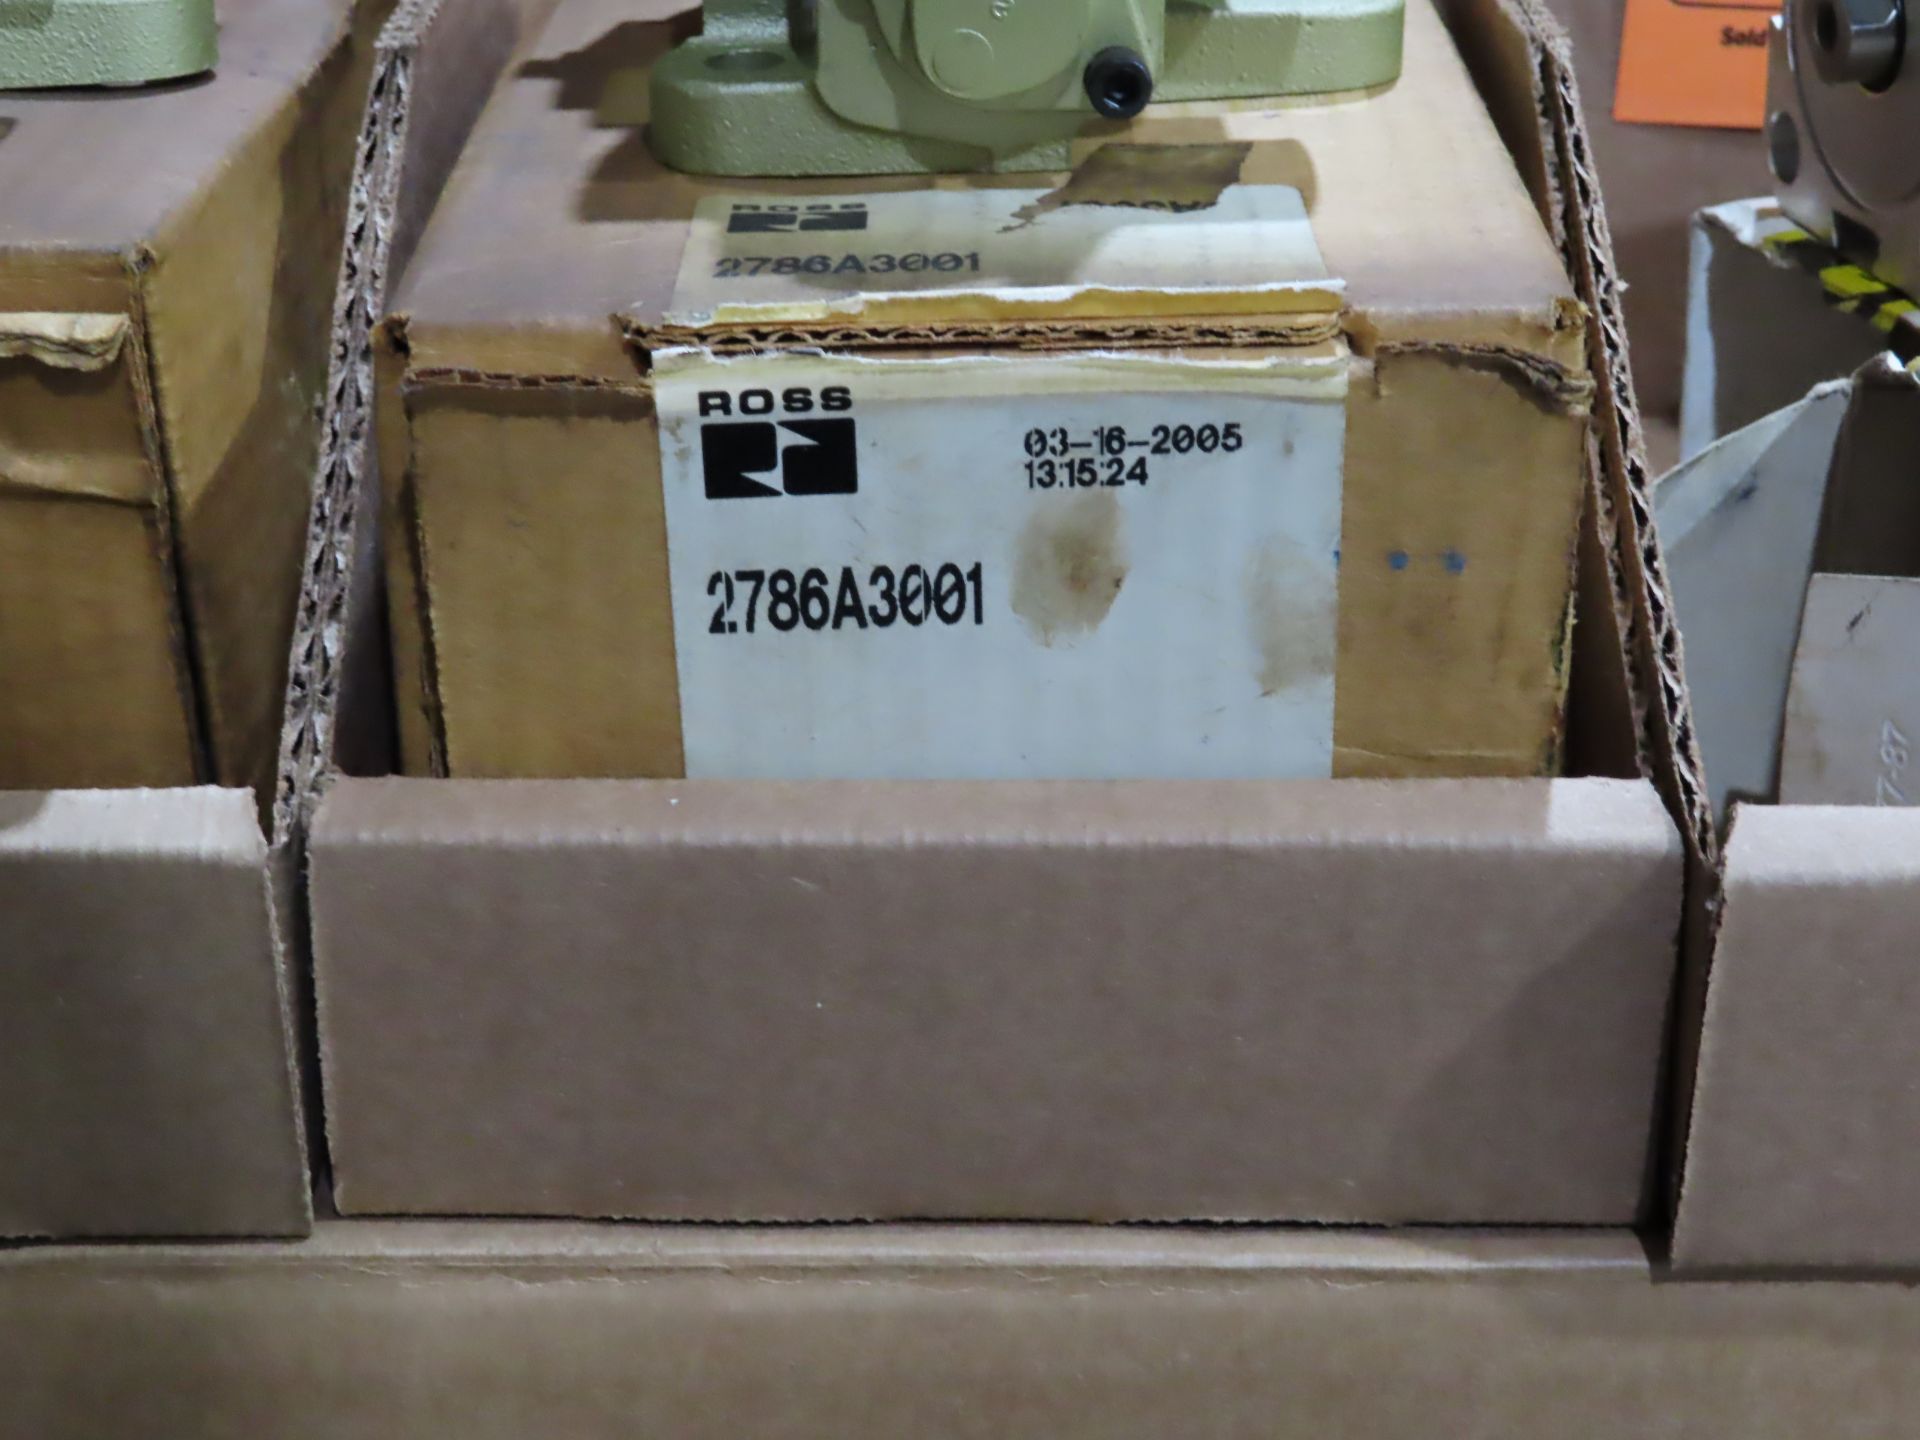 Ross model 2786A3001, new in box, as always with Brolyn LLC auctions, all lots can be picked up from - Image 2 of 2